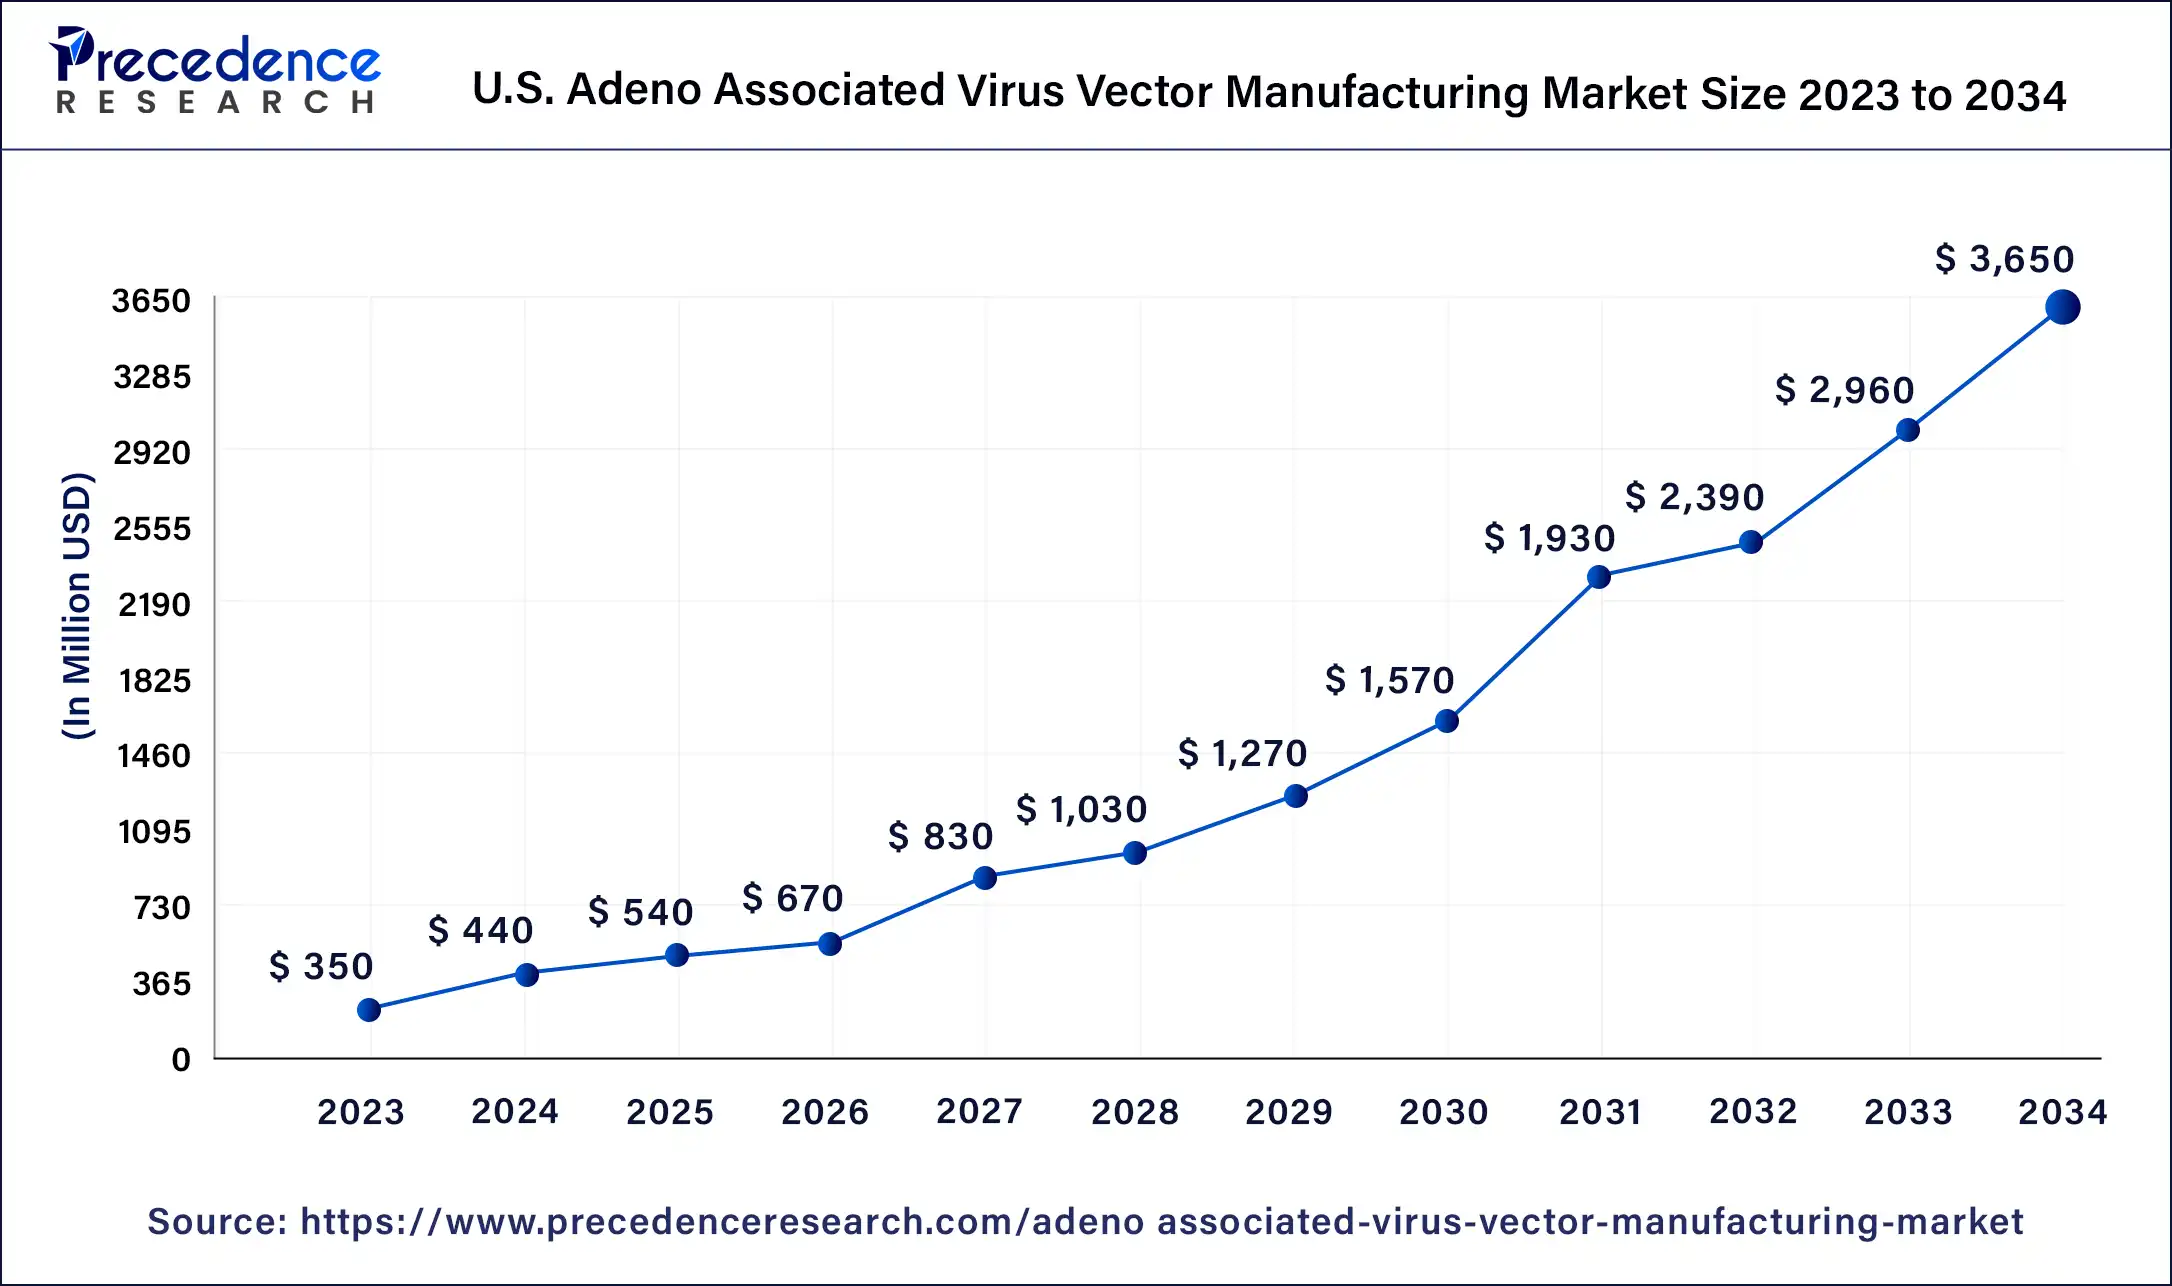 U.S. Adeno Associated Virus Vector Manufacturing Market Size 2024 to 2034